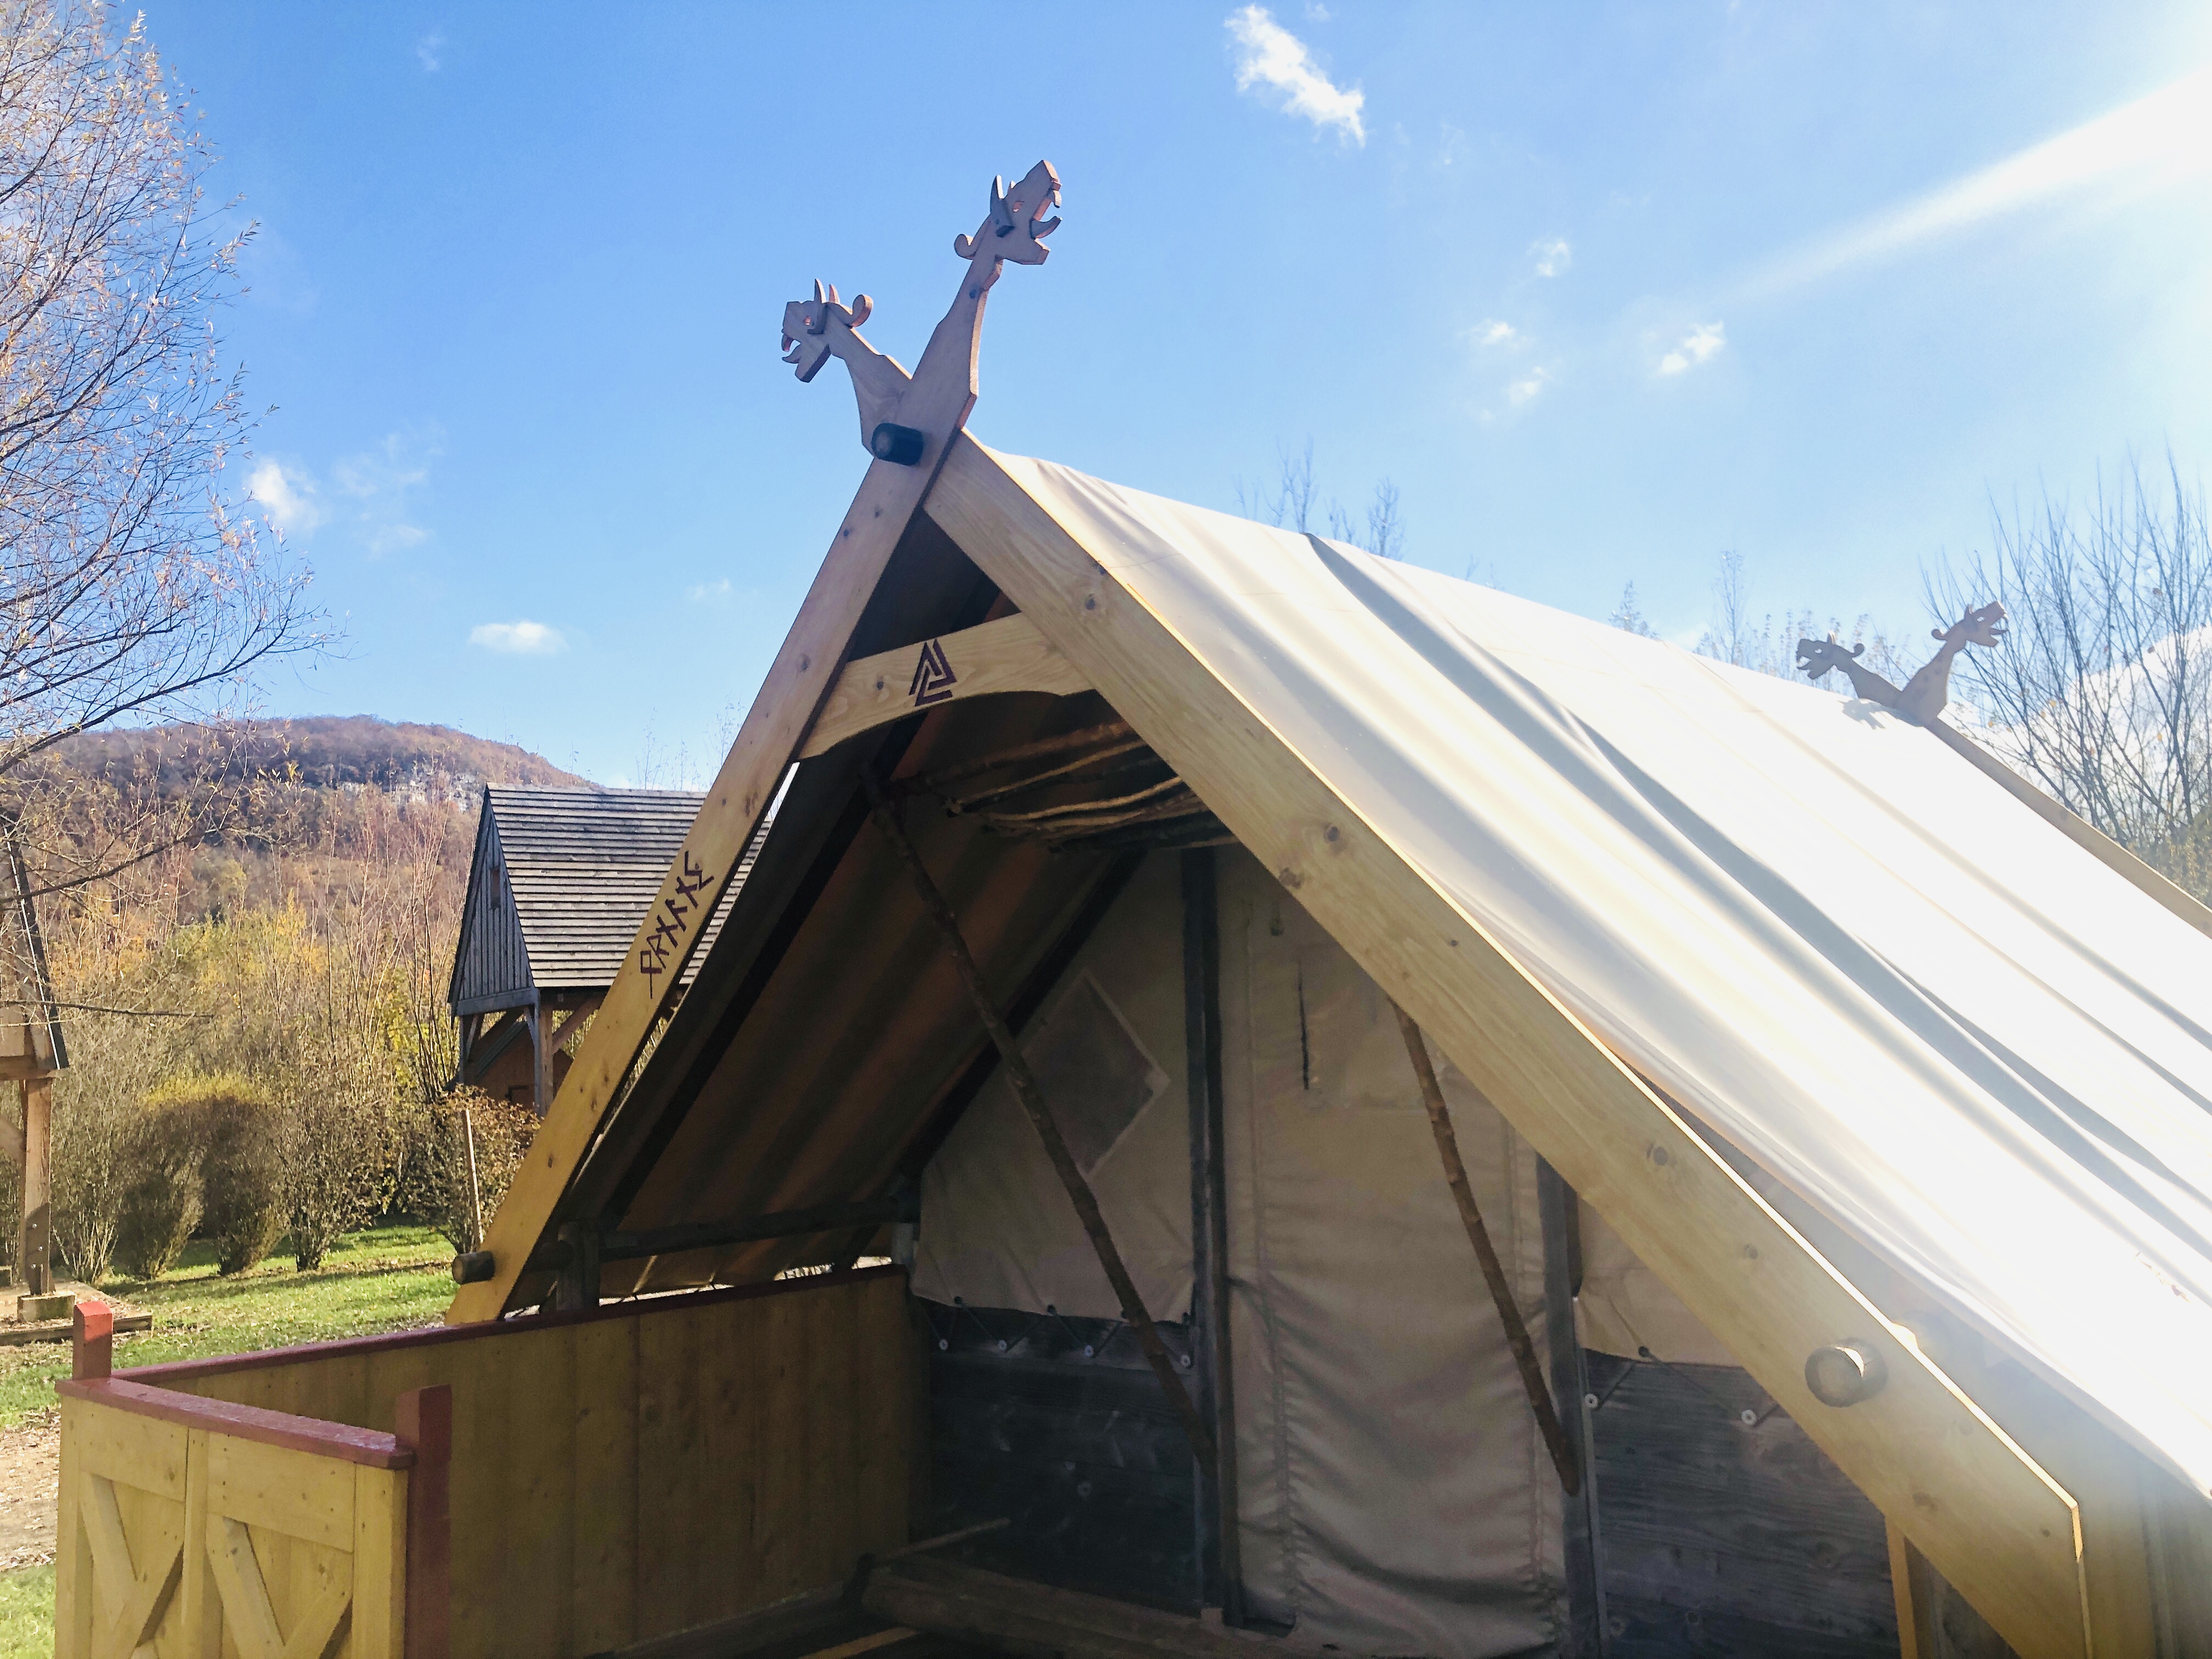 Accommodation - New! Lodge Skàli - 15M² - 2 Bedrooms - No Toilets, A Viking Style Comfort Tent! - Camping Ecologique LA ROCHE D'ULLY